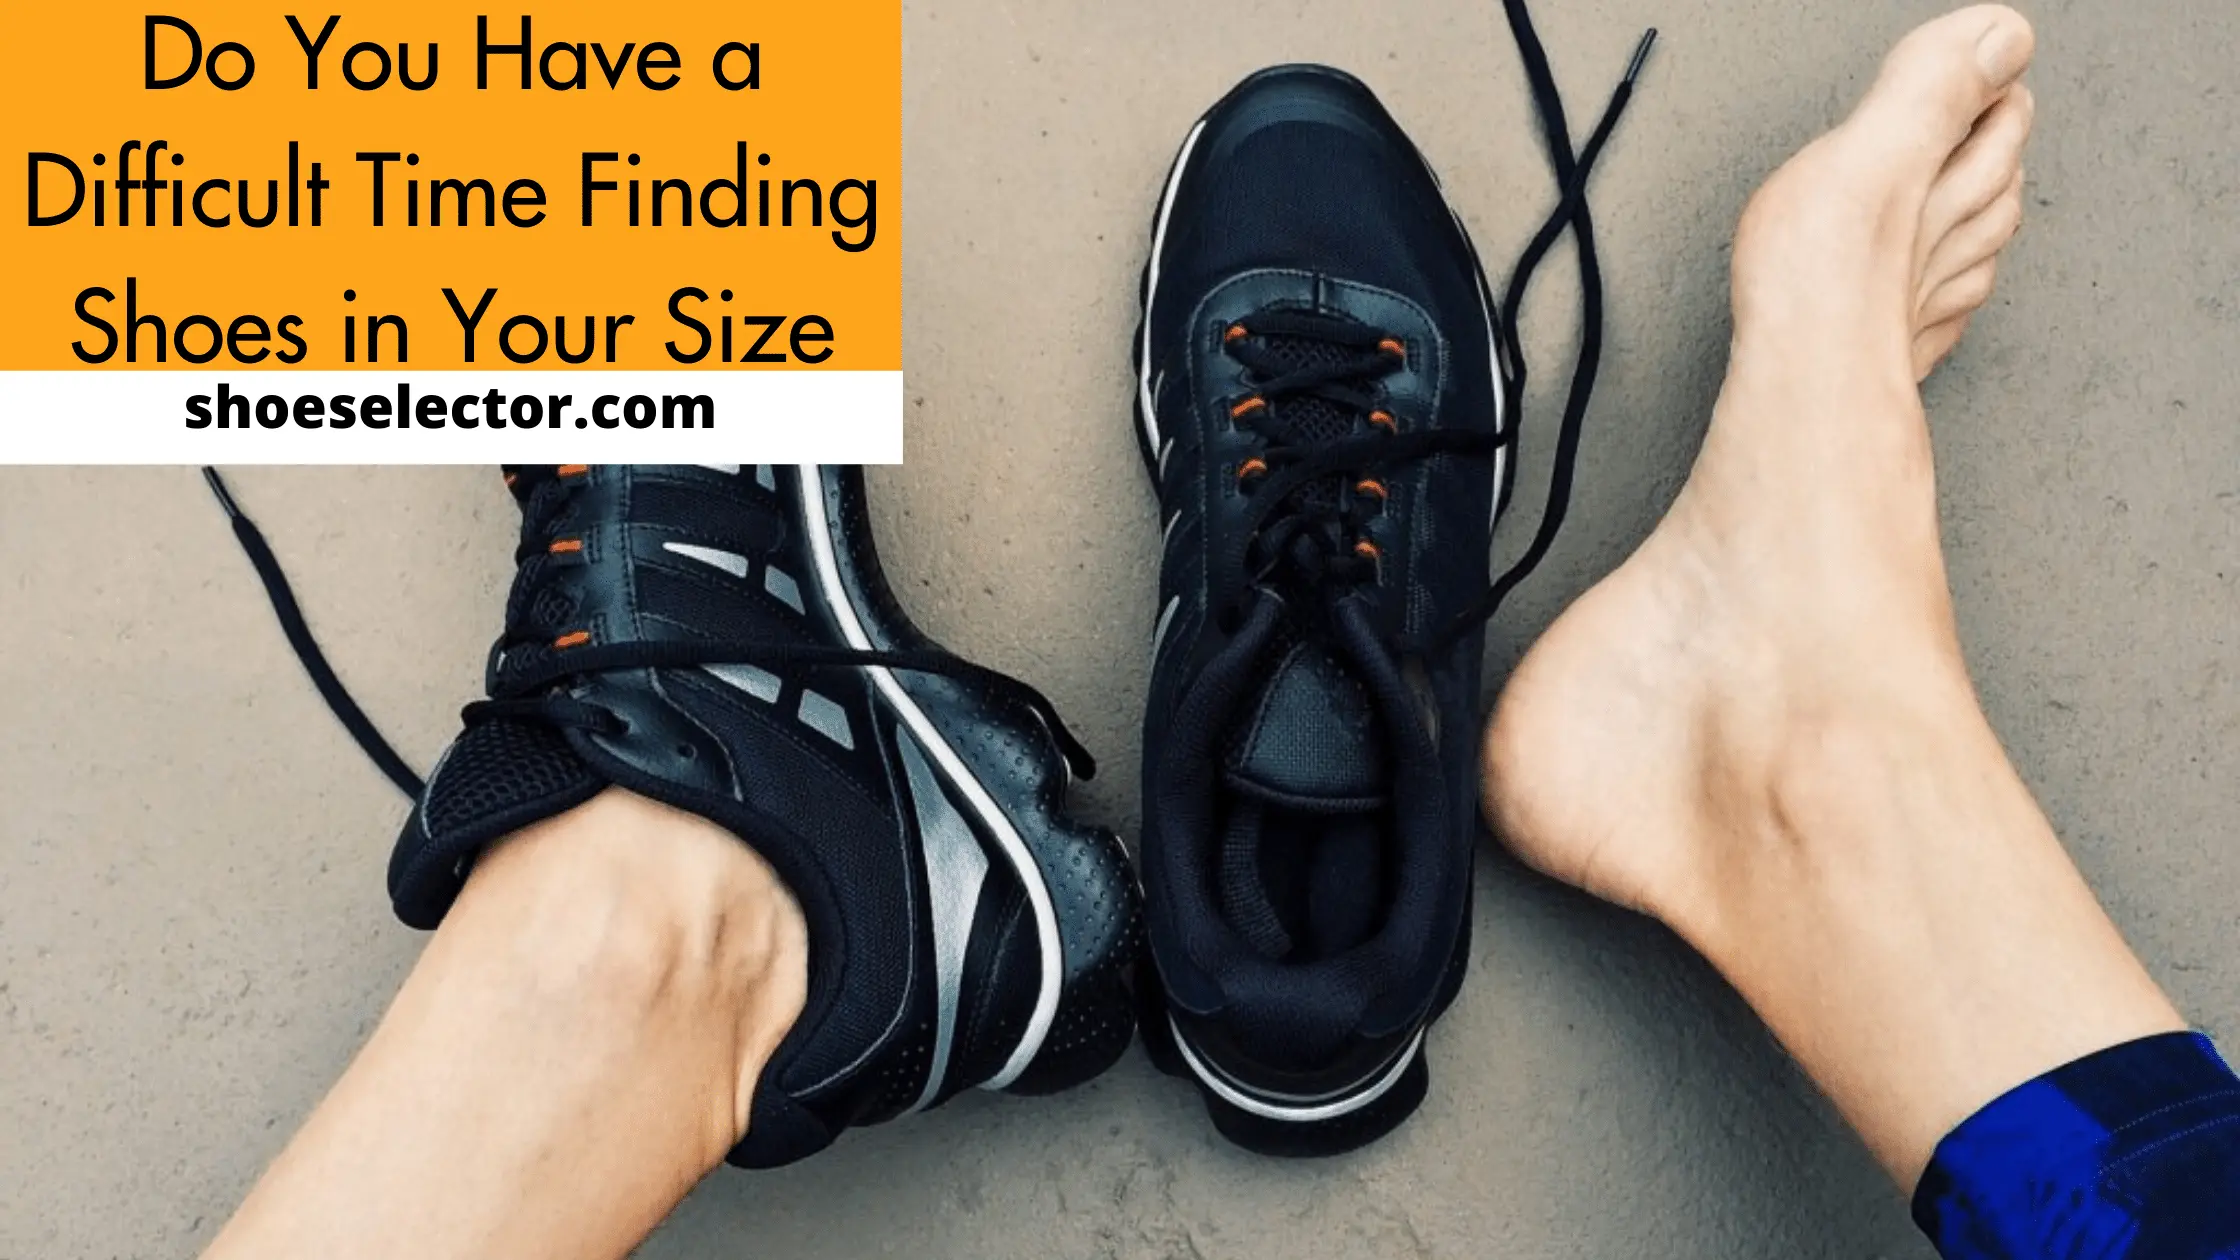 Do You Have a Difficult Time Finding Shoes in Your Size?